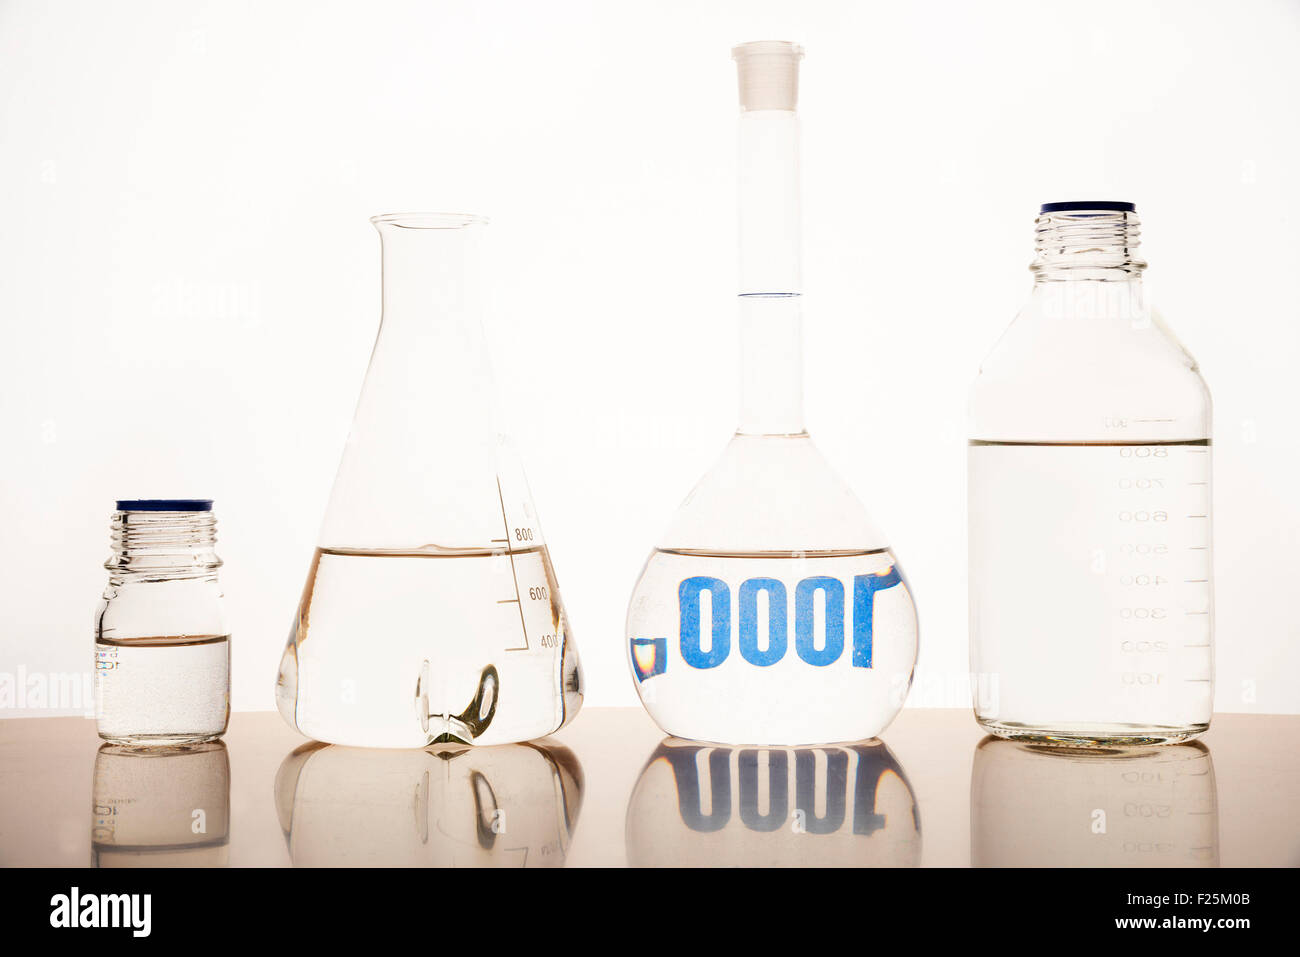 Measuring glasses on a table of a chemical laboratory Stock Photo